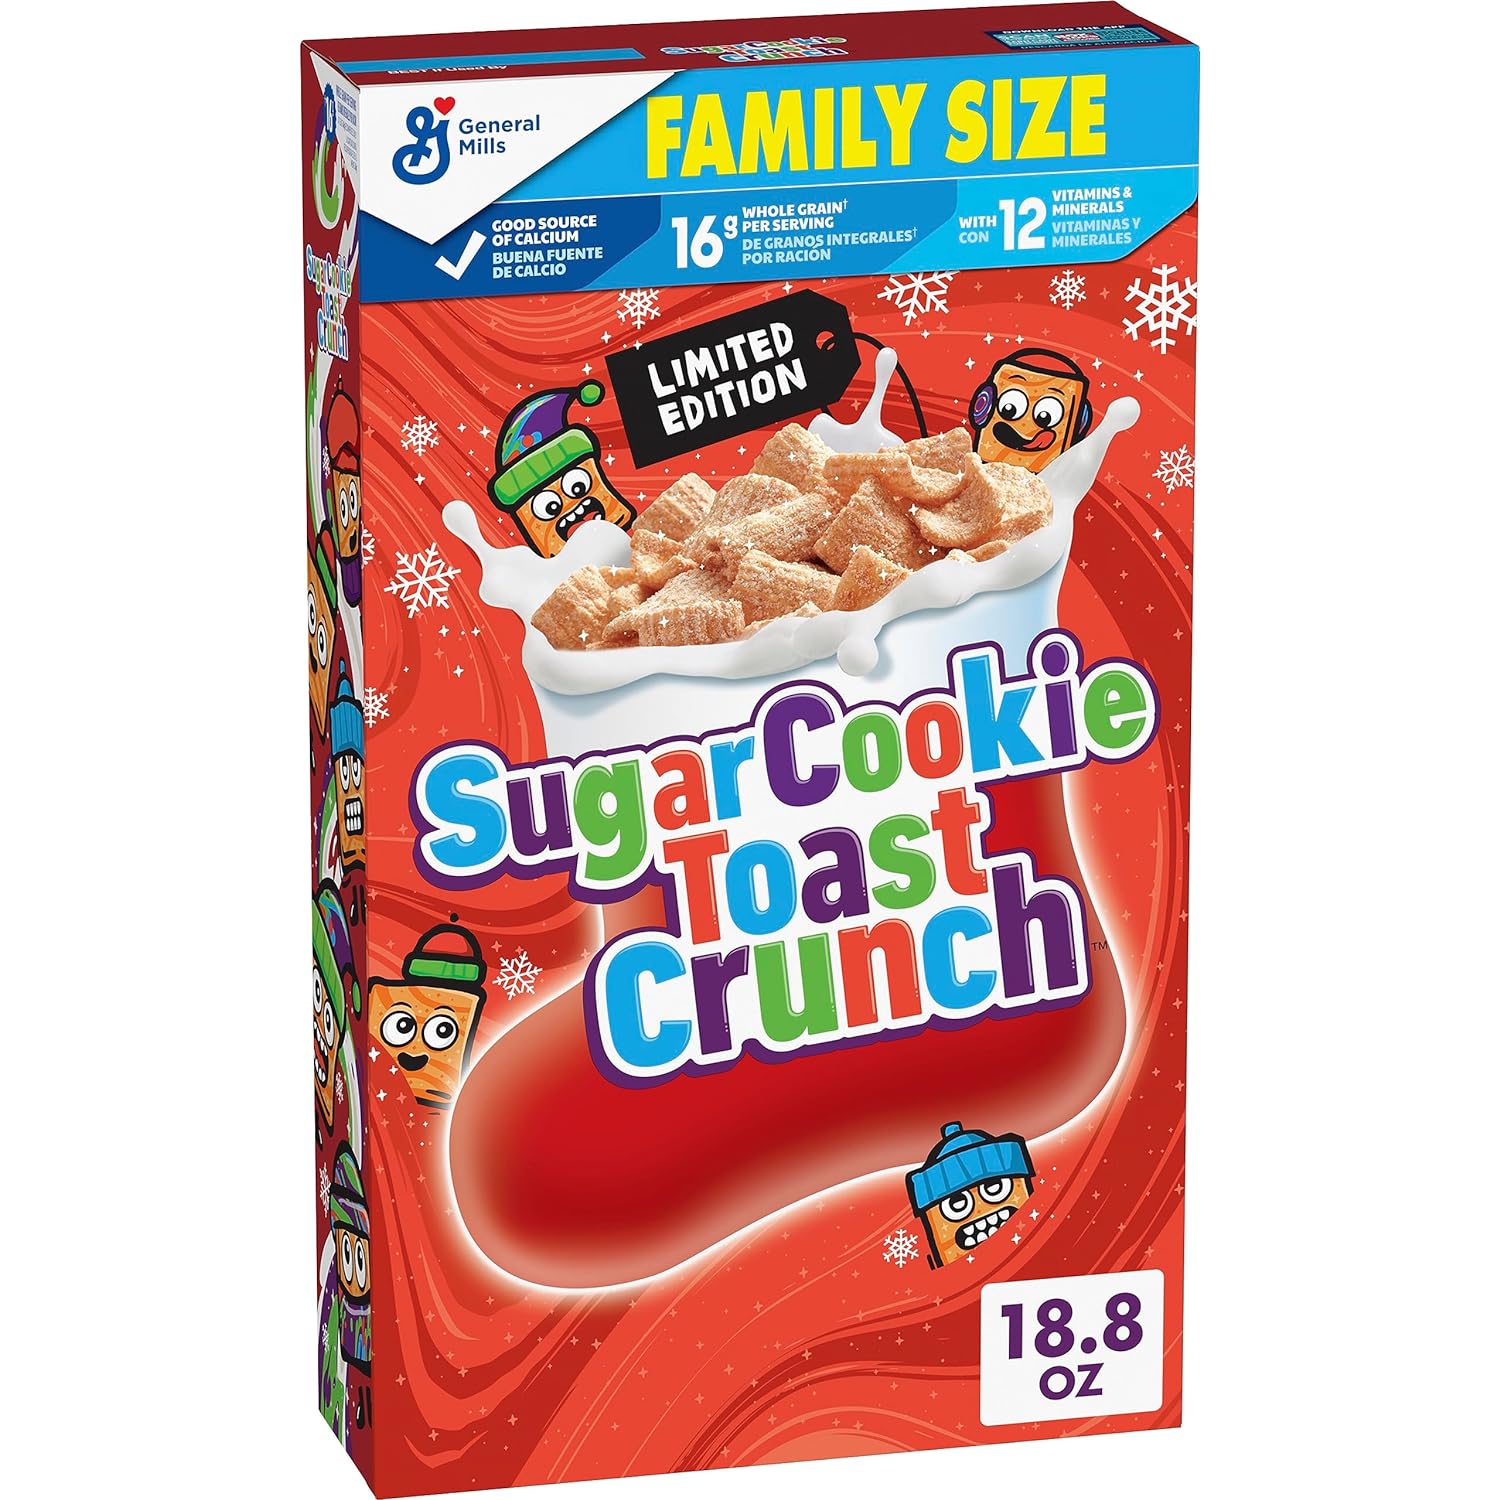 Sugar Cookie Toast Crunch Breakfast Cereal, Crispy Naturally Flavored Sugar Cookie Cinnamon Cereal, Limited Edition, Family Size, 18.8 oz